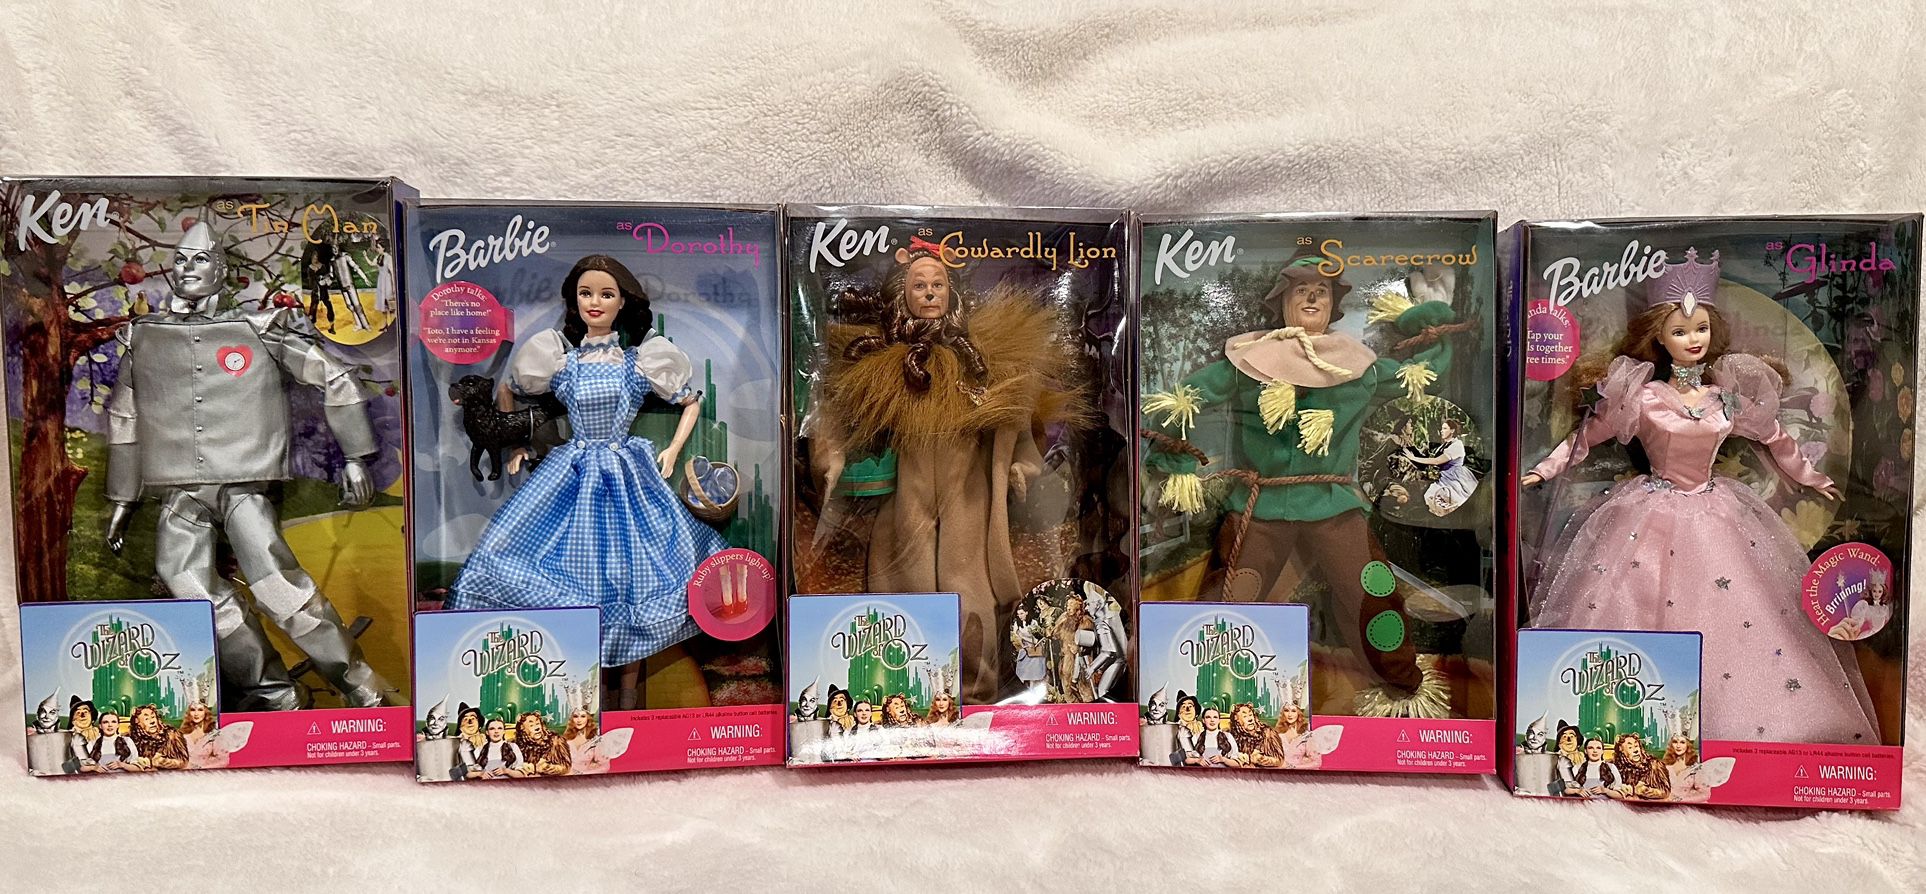 Vintage Wizard of Oz Complete Set of 5 - 1999 Barbie Ken Doll Collection New!!!